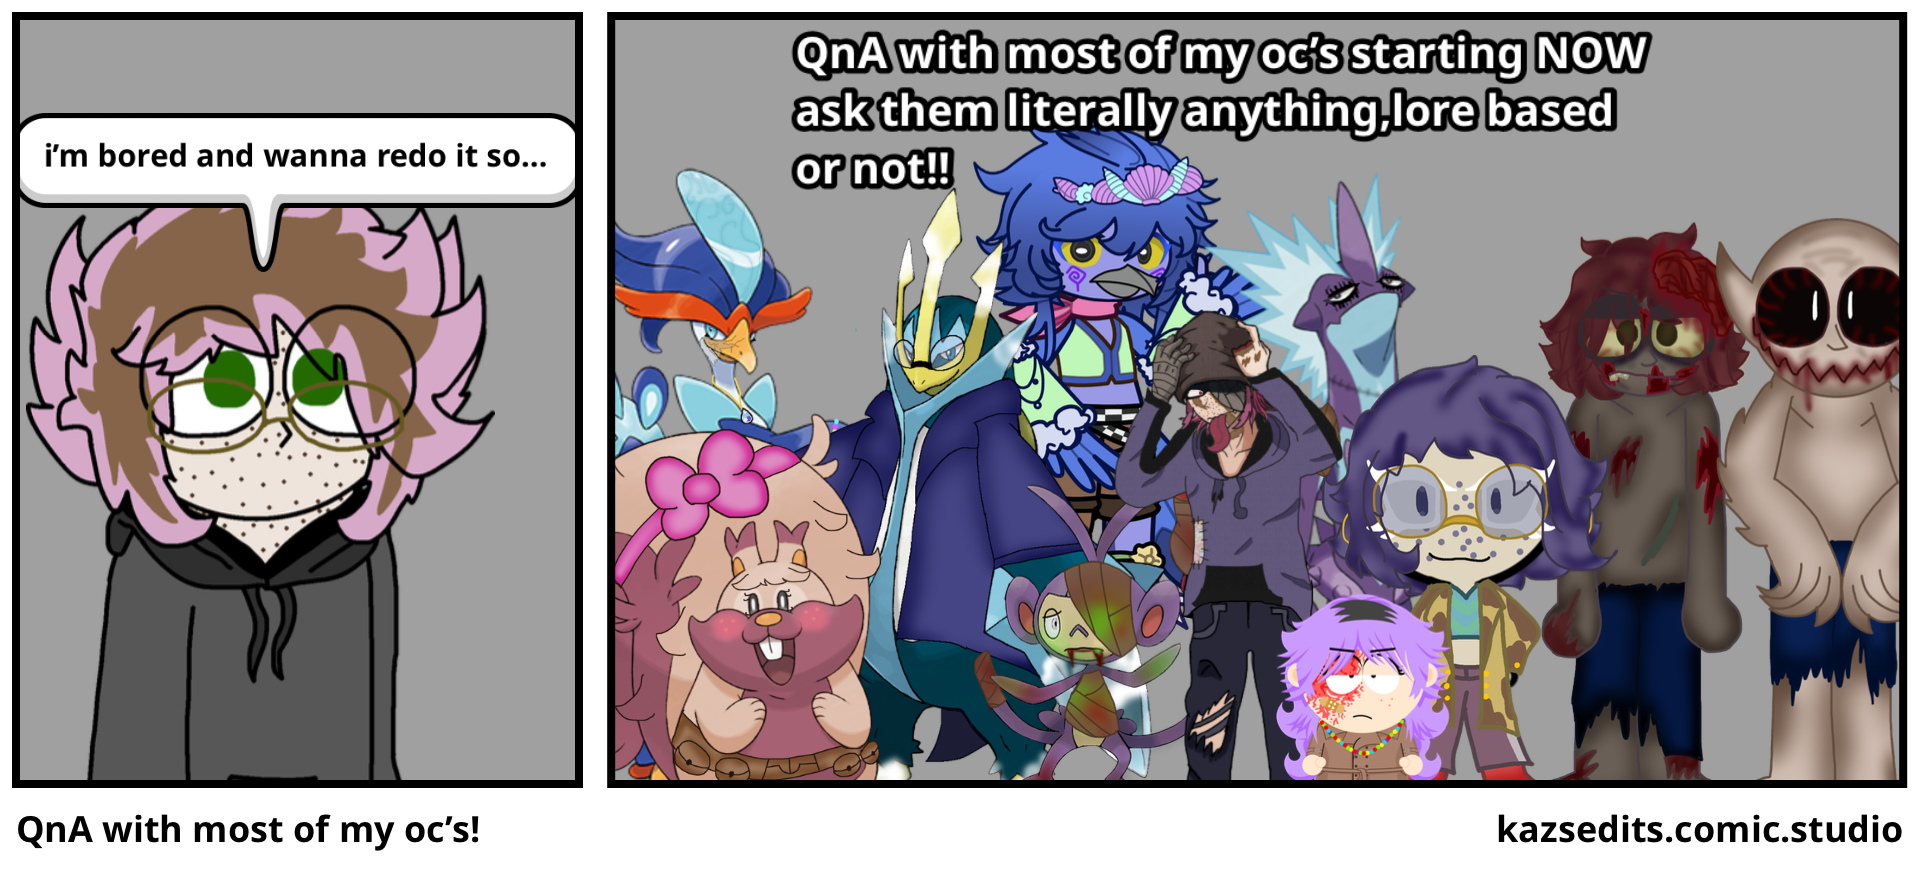 QnA with most of my oc’s!